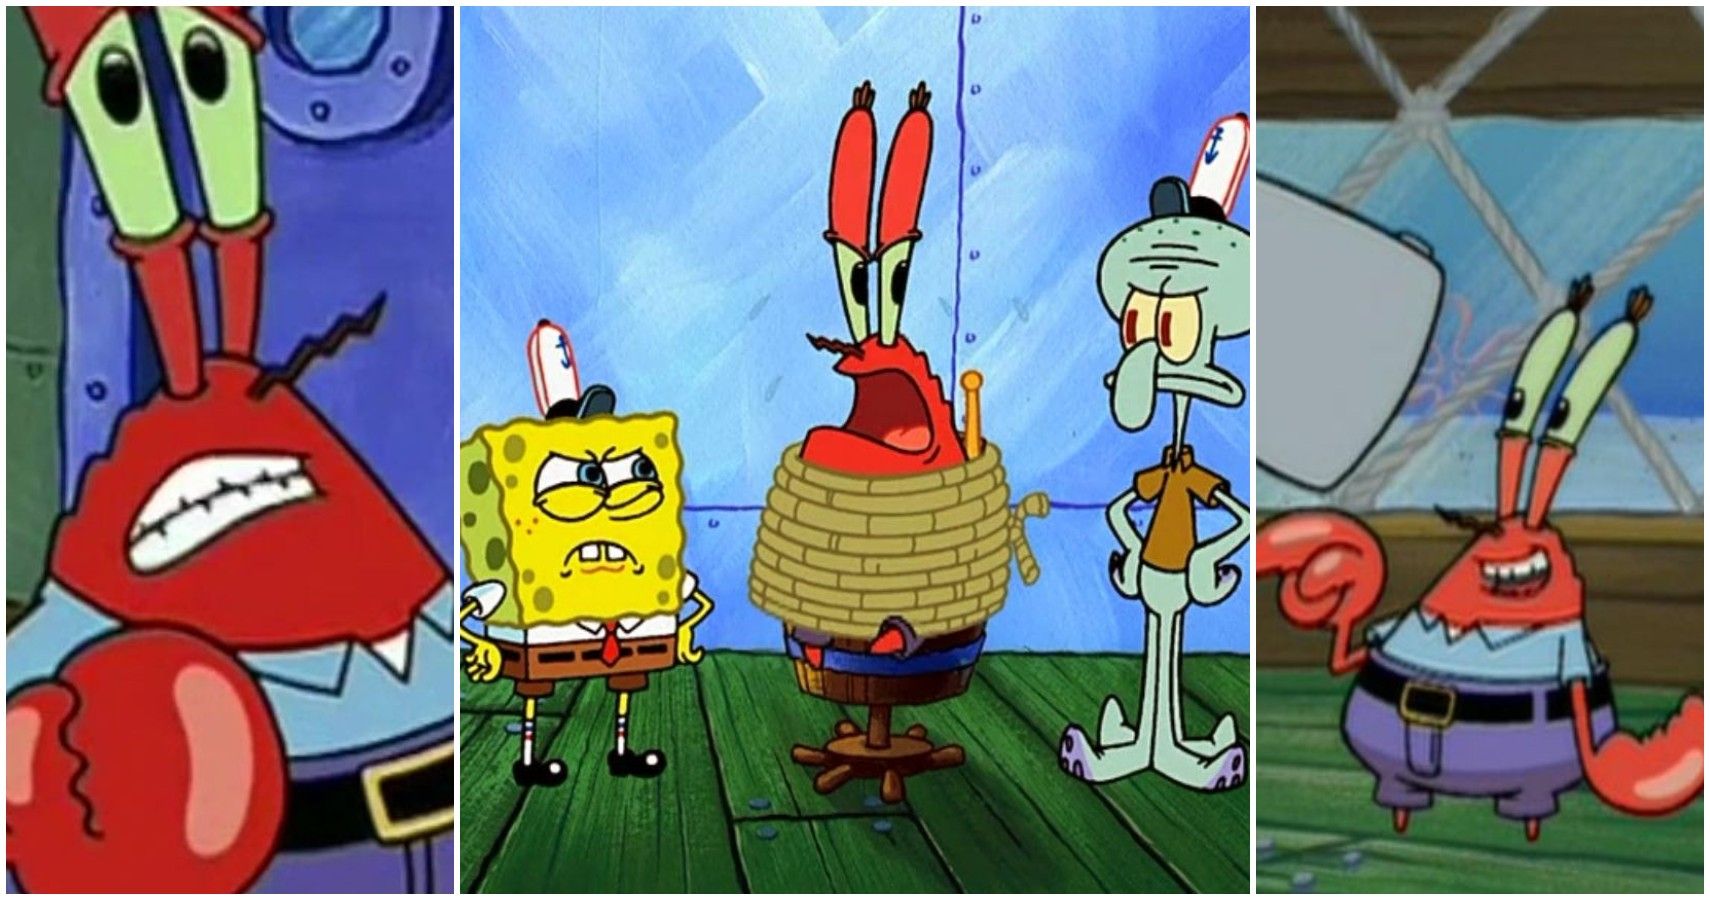 The Mysterious Demise of Mr. Krabs Die: Unraveling the Mystery